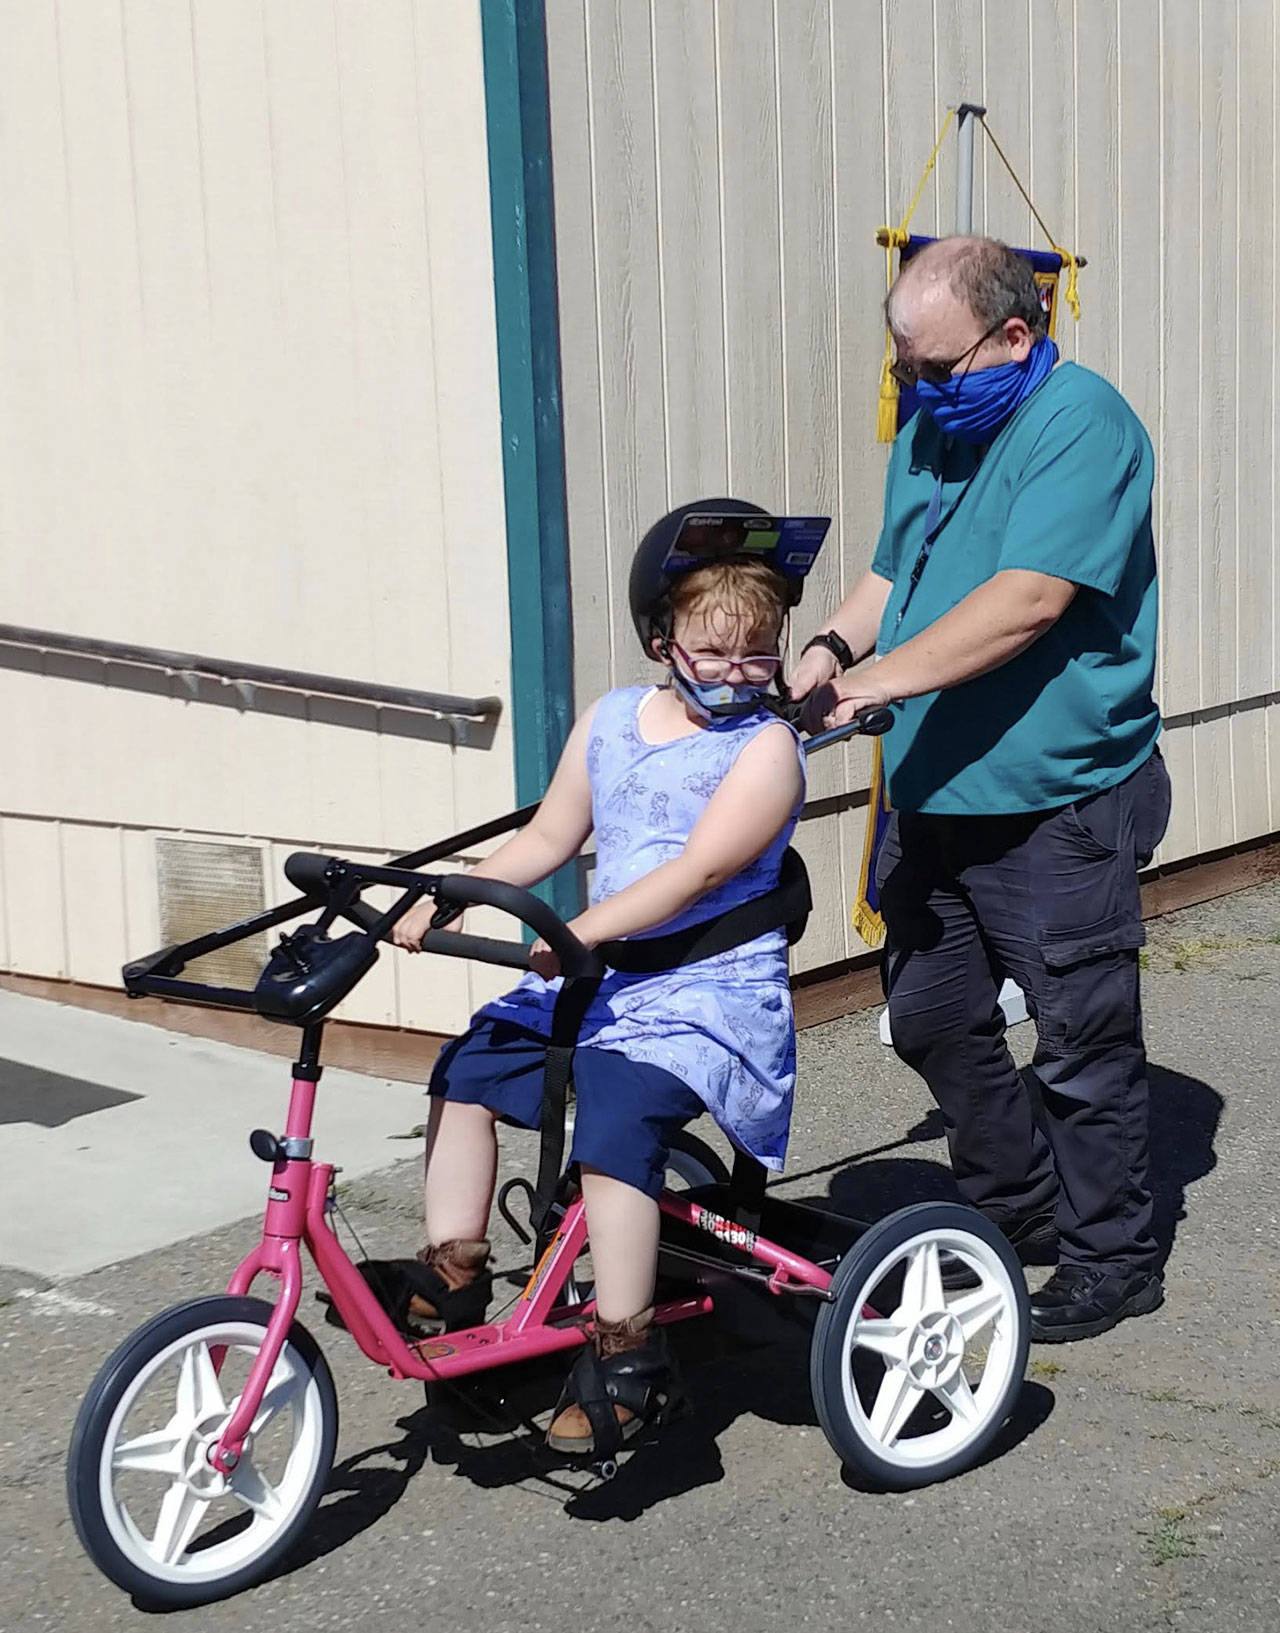 A Sequim student enjoys a ride on a newly donated adaptive bicycle, donated by Rotary Club of Sequim.